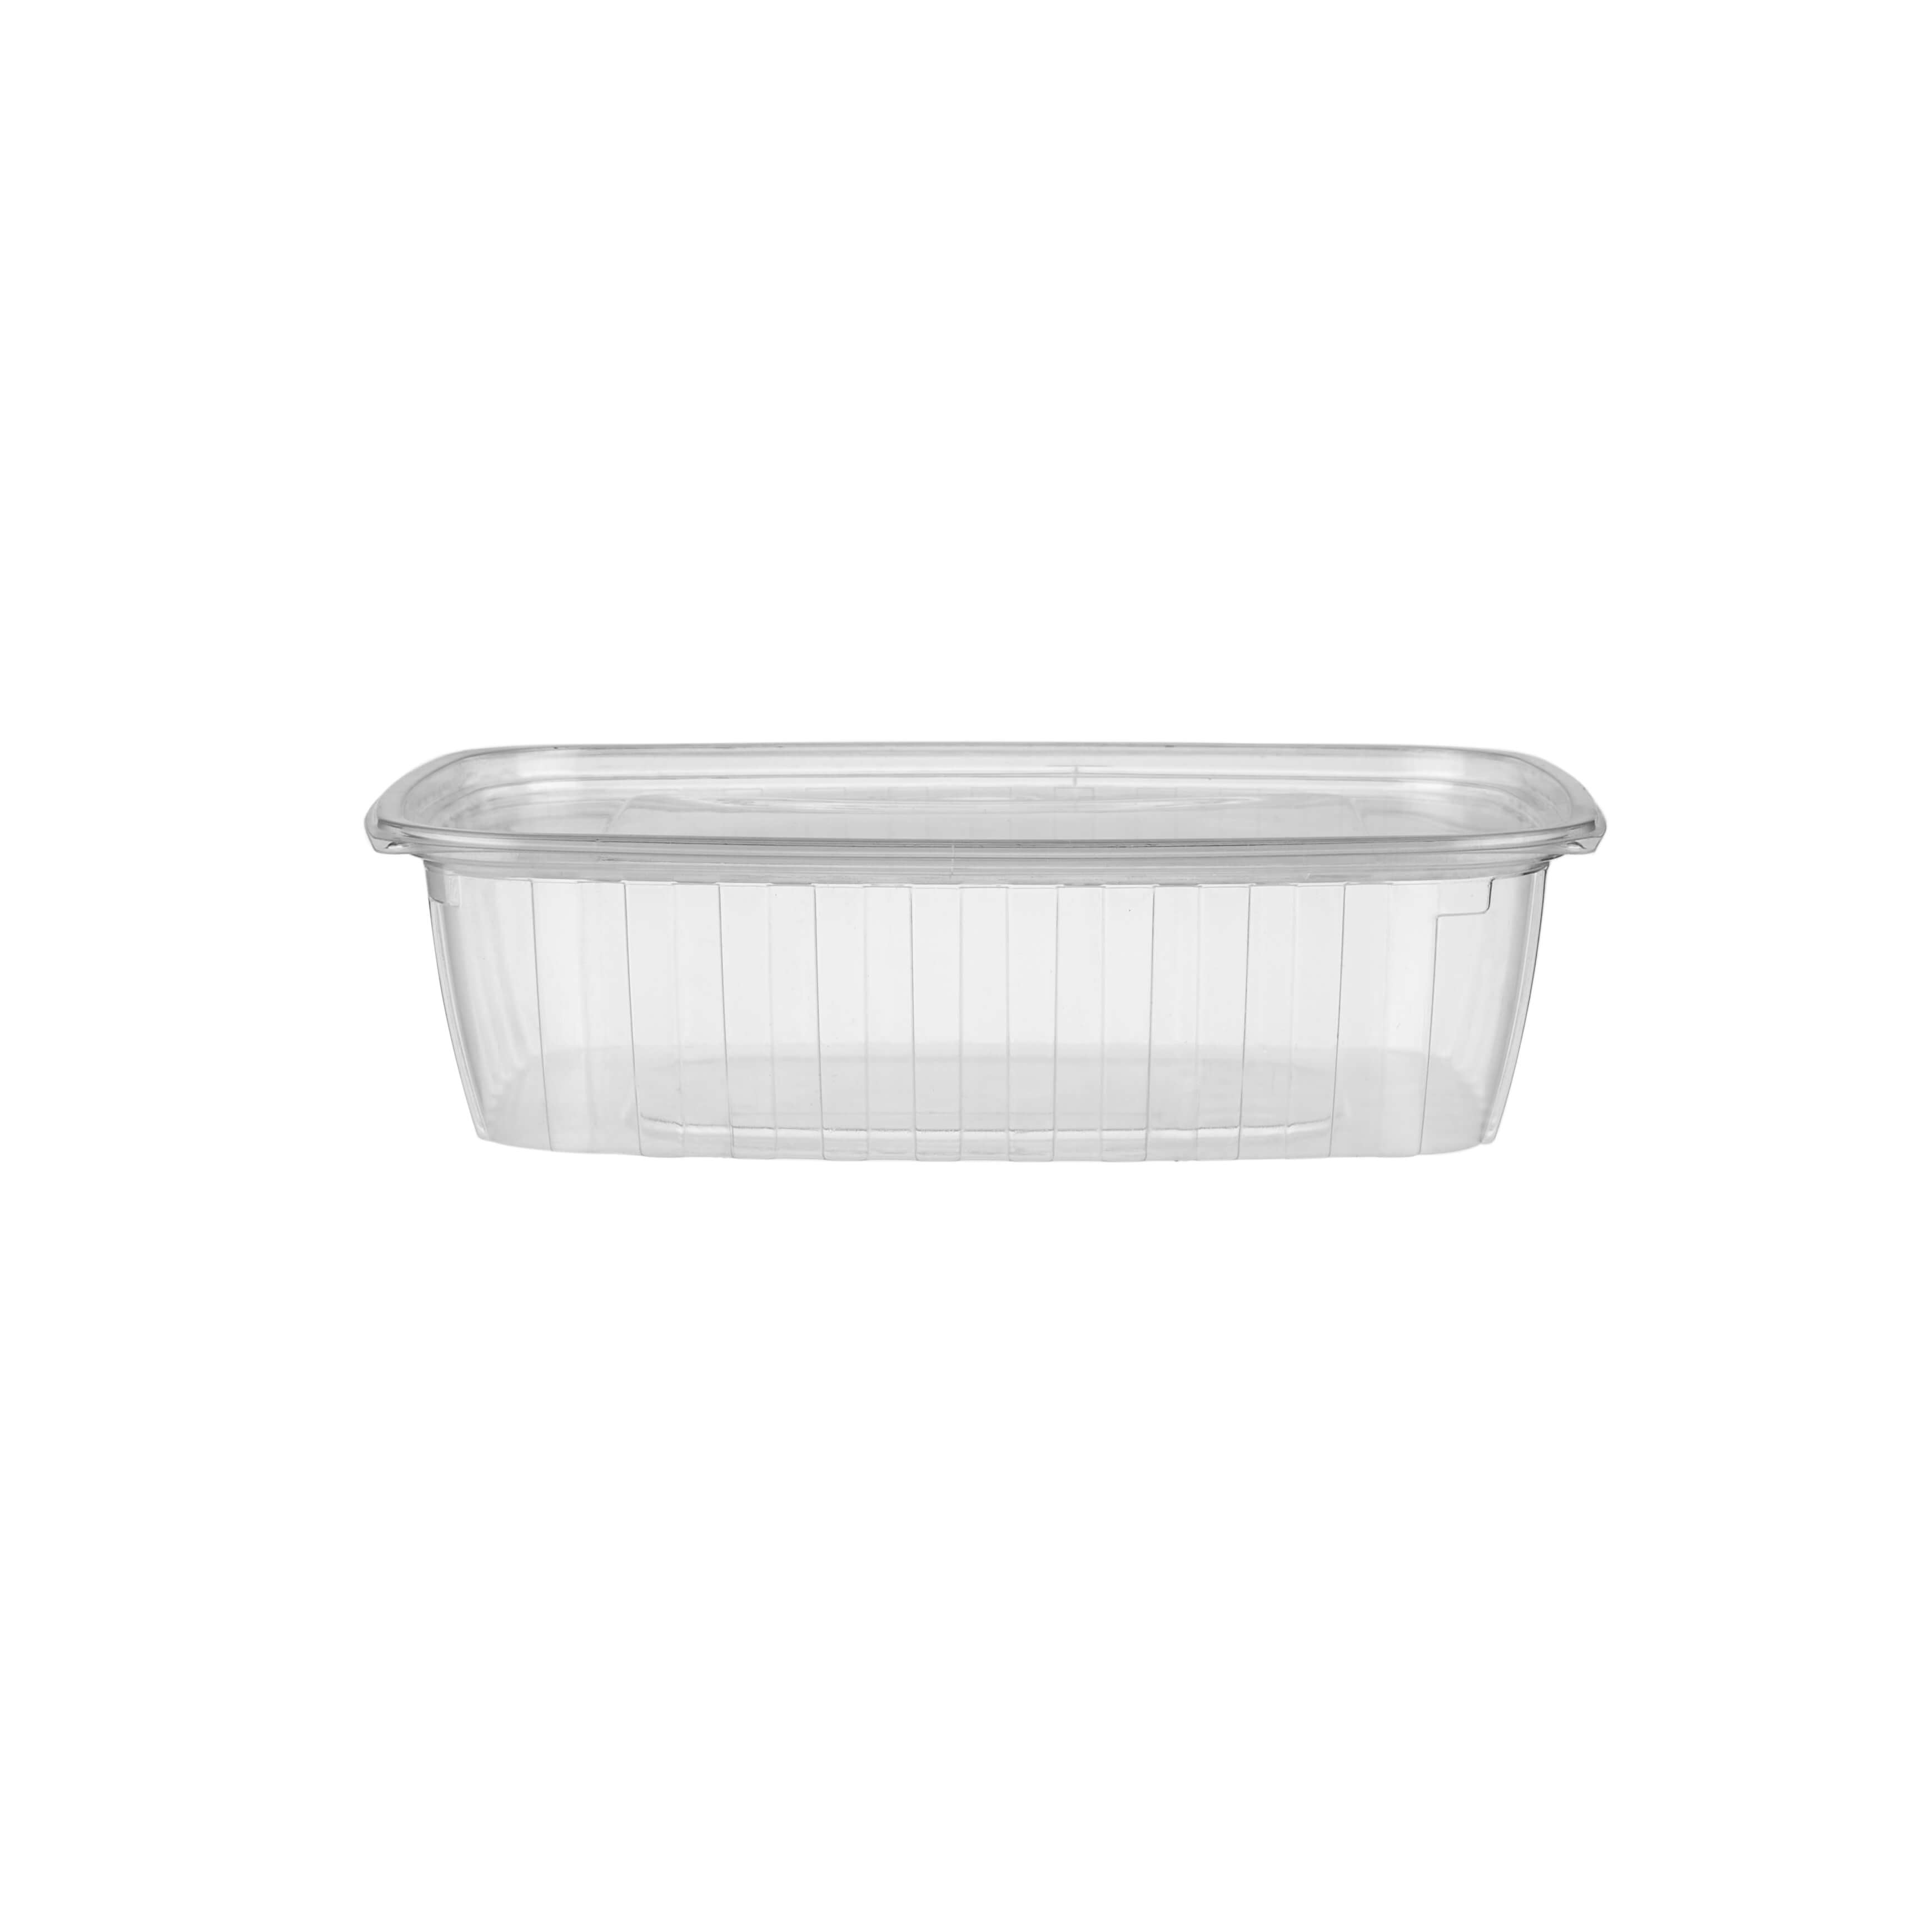 Clear Rectangular Container With Lid - hotpackwebstore.com